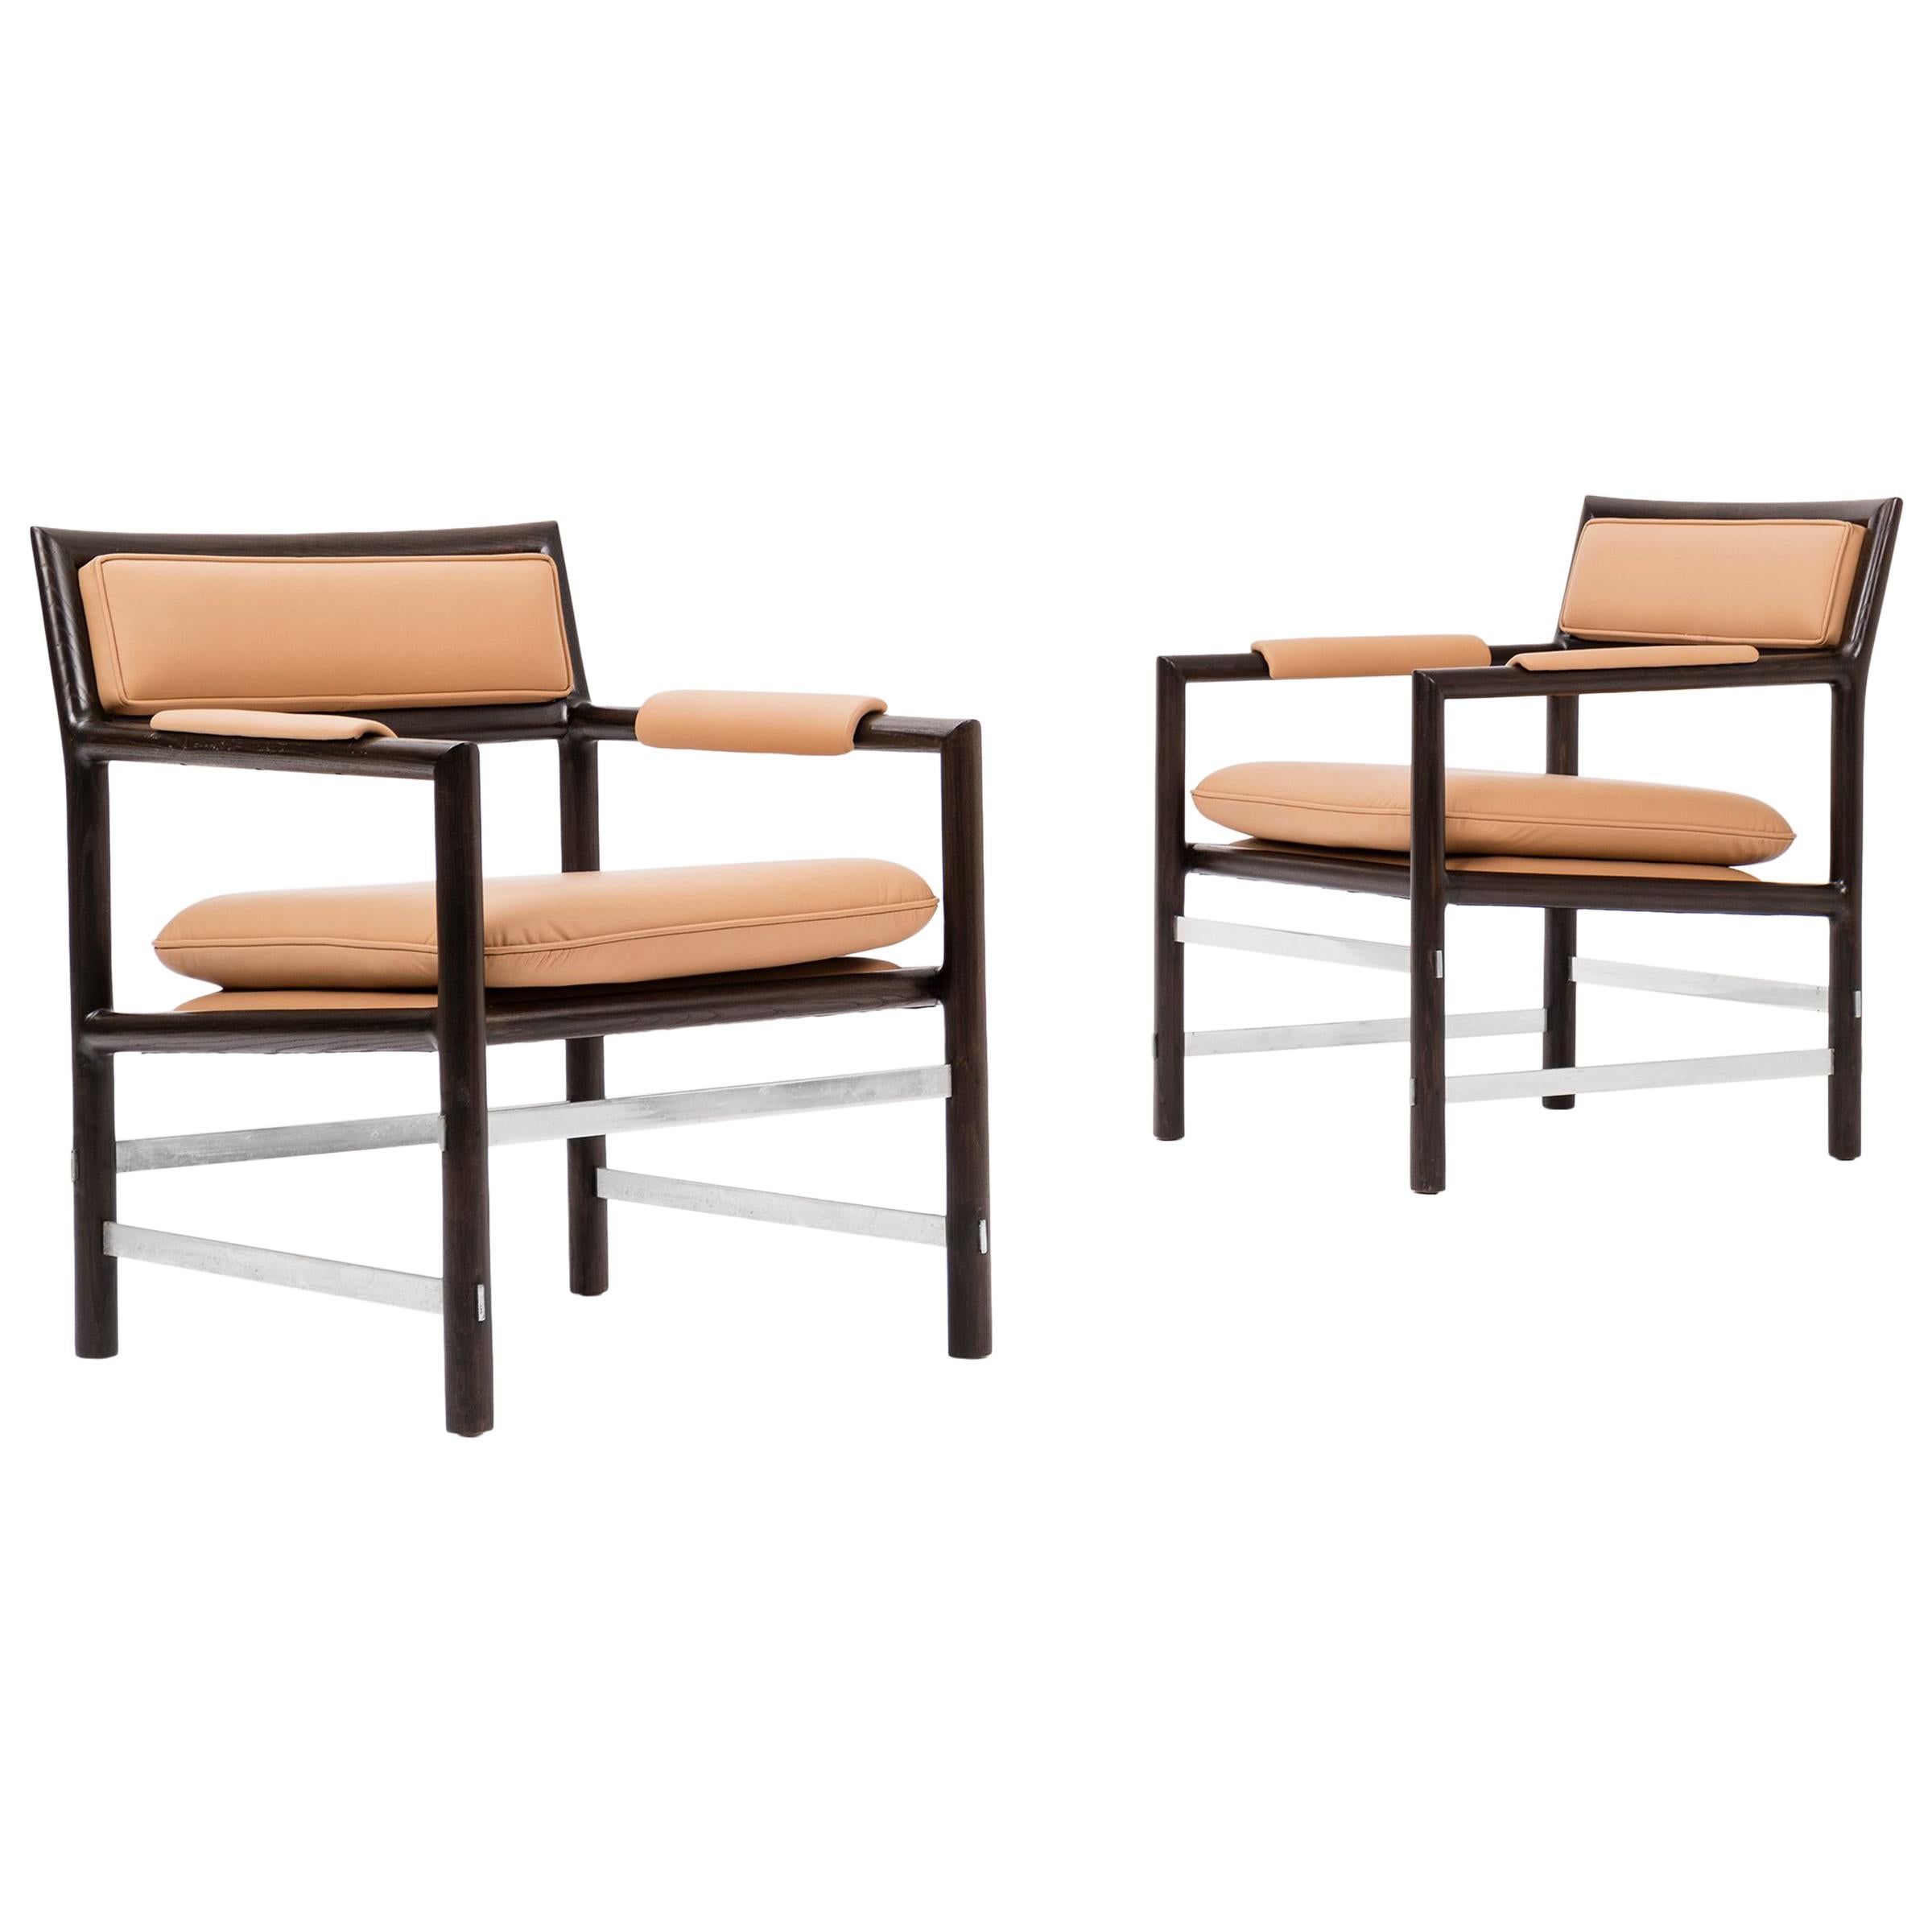 Pair of Edward Wormley Armchairs